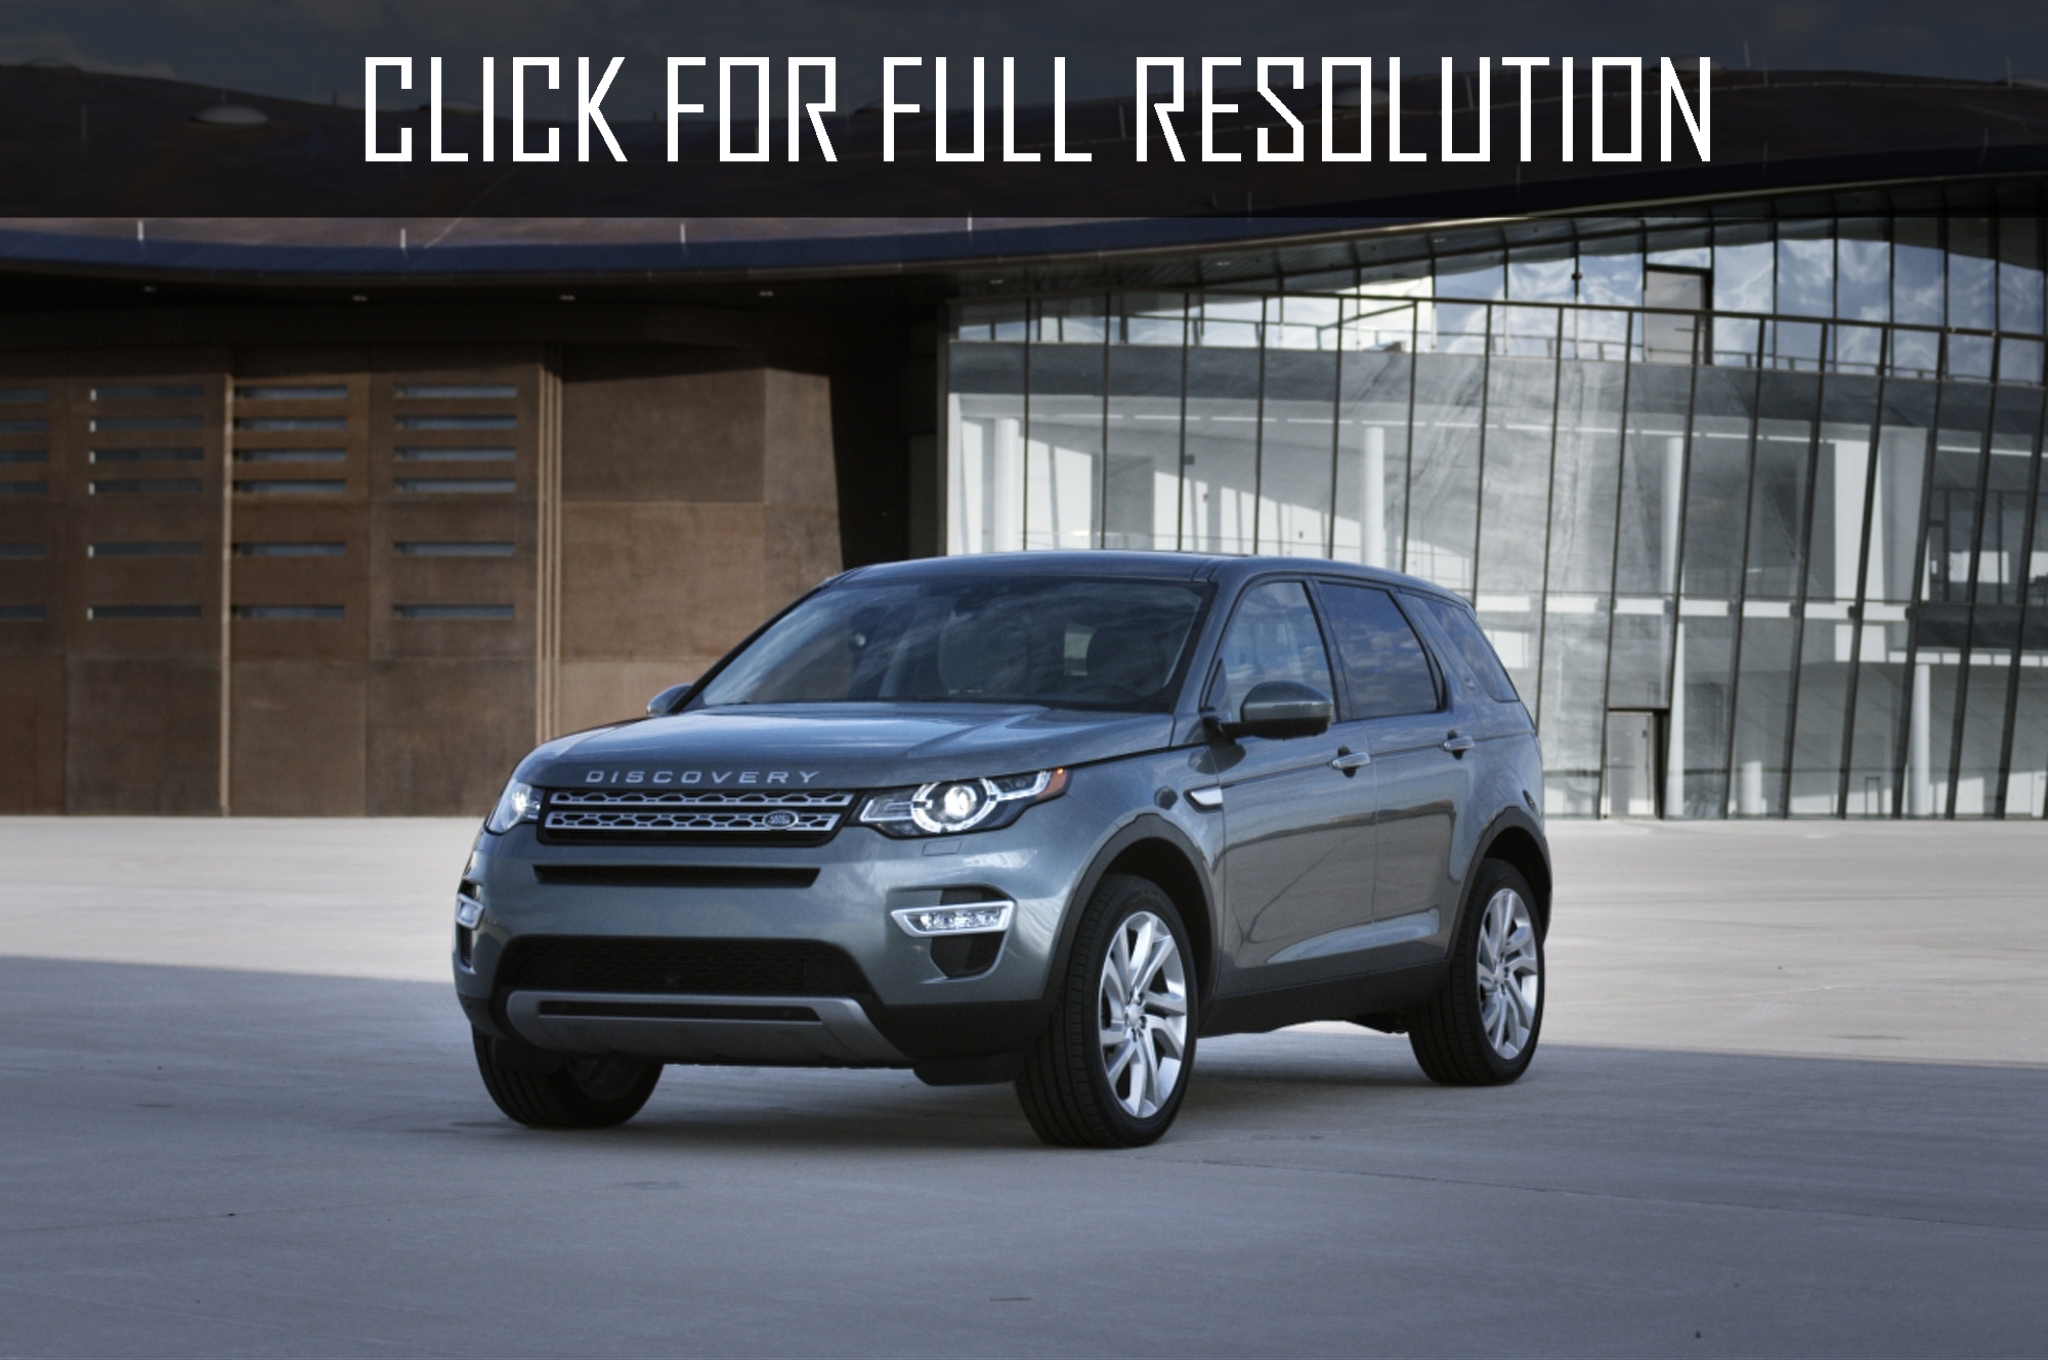 2015 Land Rover Discovery Sport Best Image Gallery 5 16